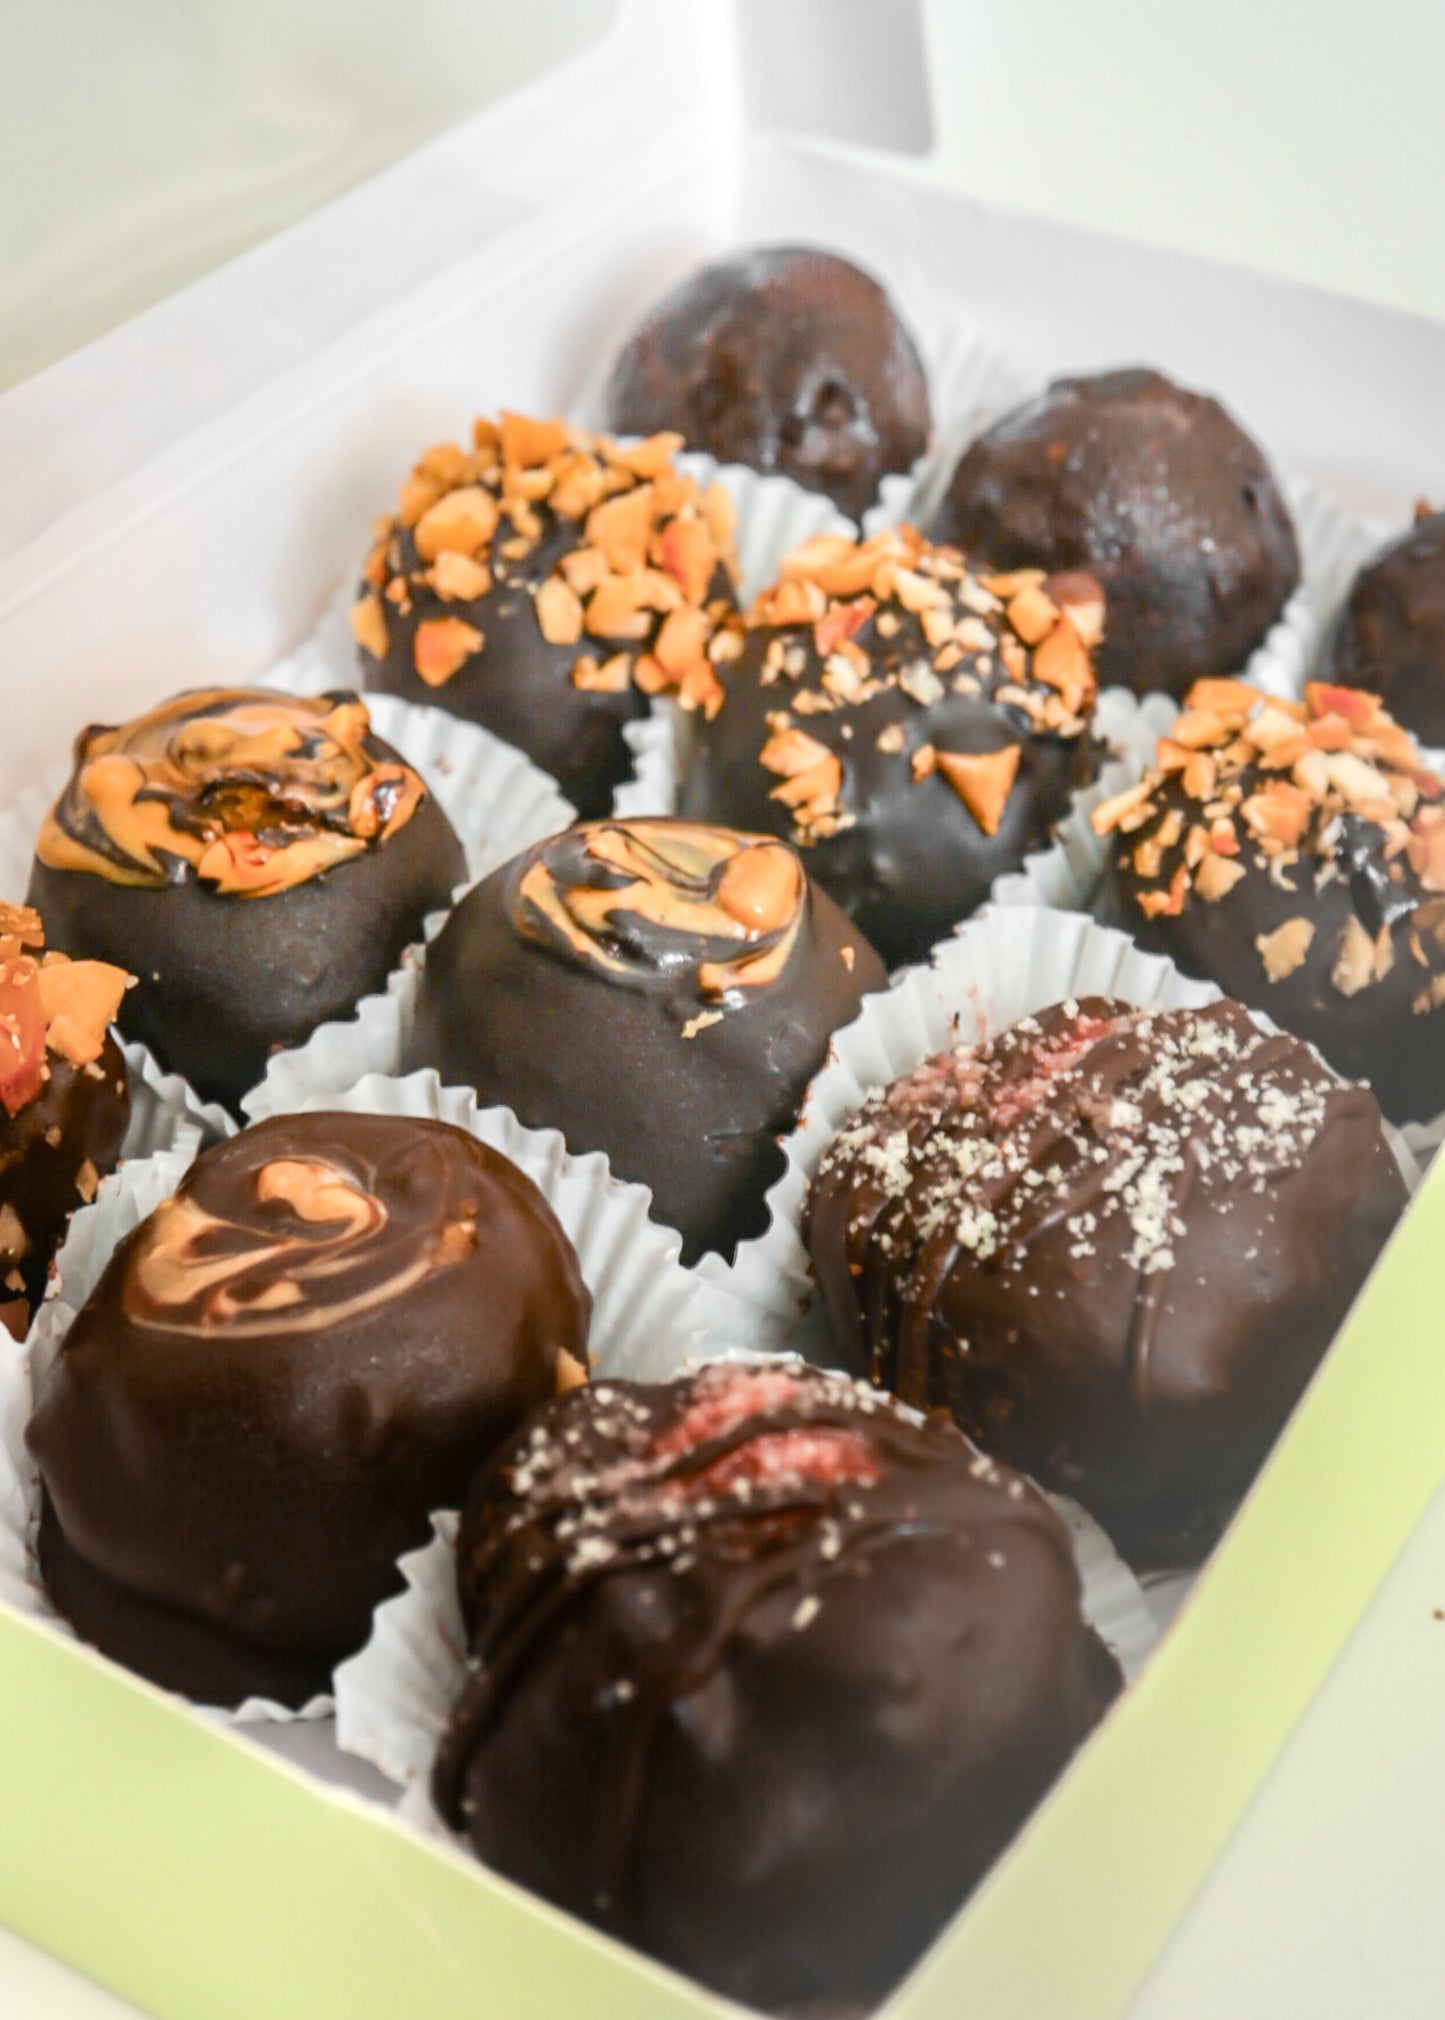 Best Seller: Assorted Truffles - Mixed of Pea Protein and Cake Truffles